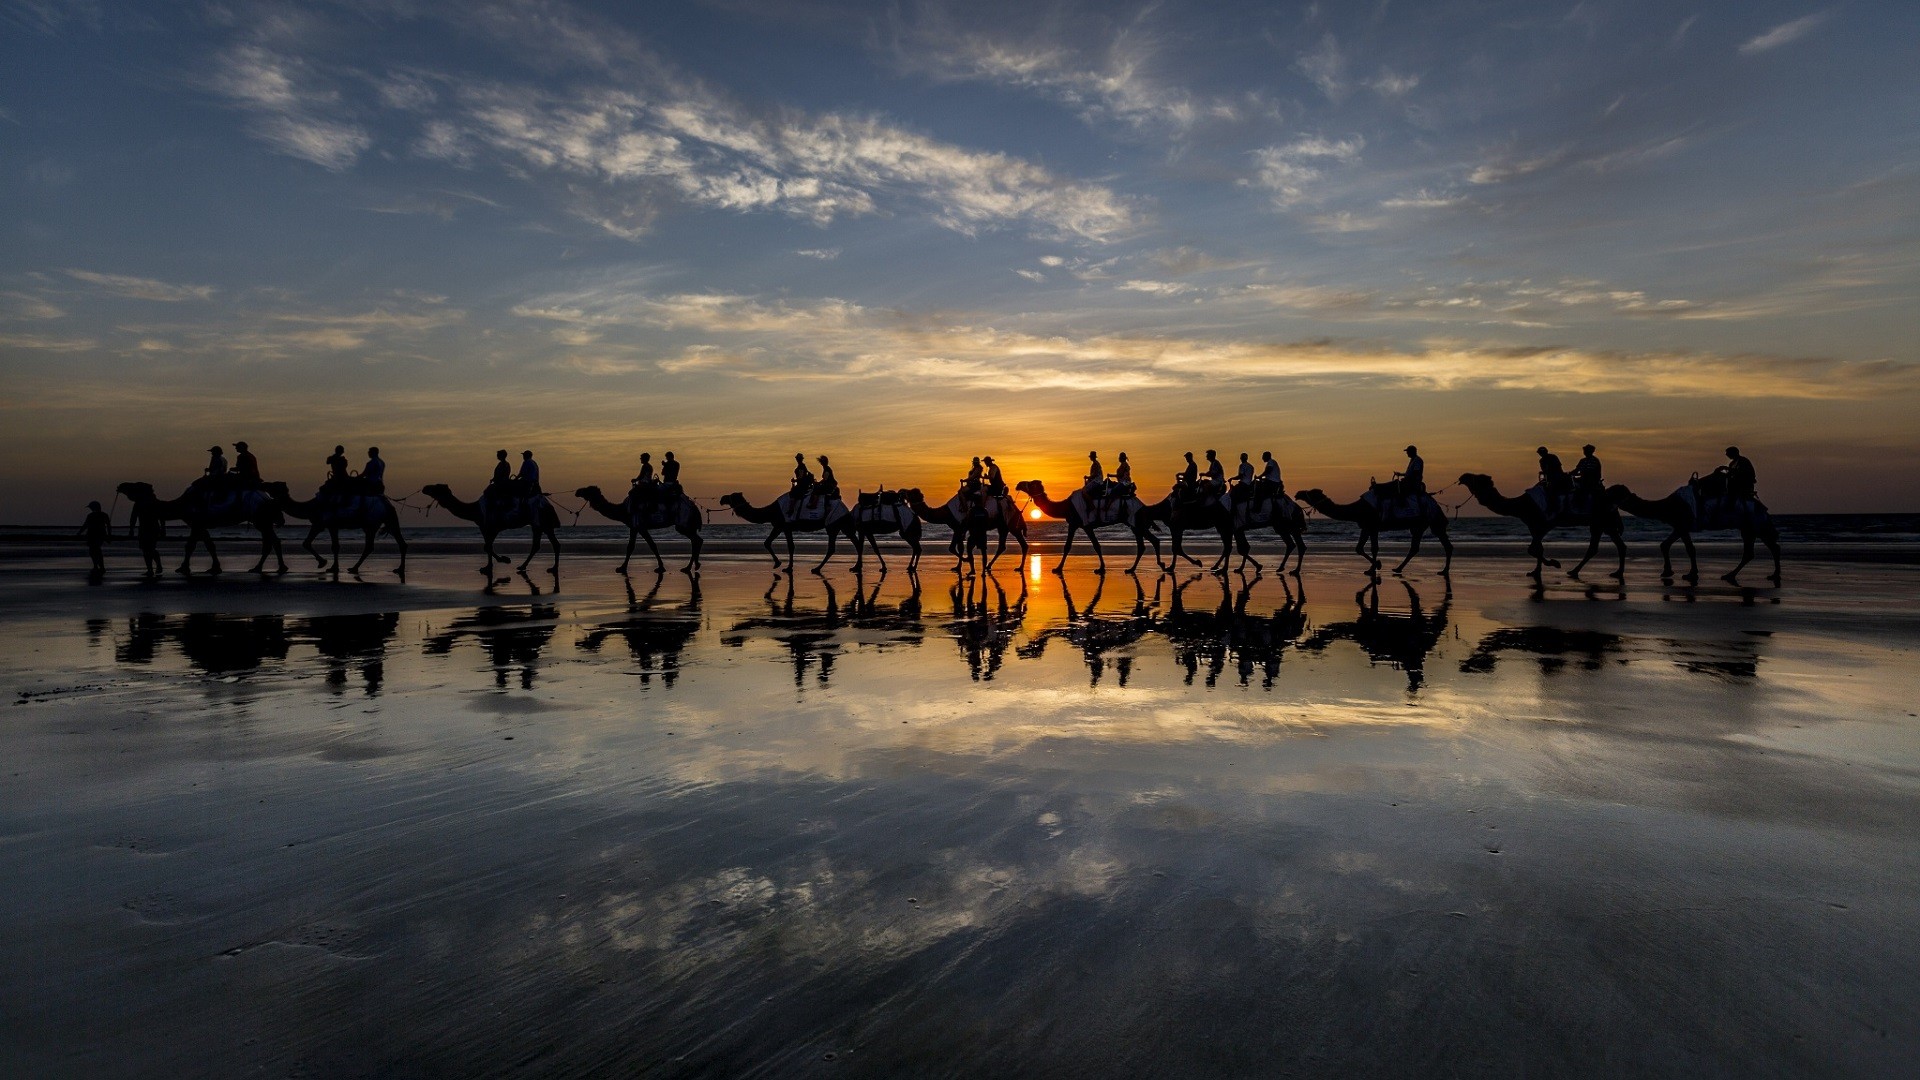 General 1920x1080 camels people silhouette beach sunset animals mammals sky sunlight clouds outdoors reflection